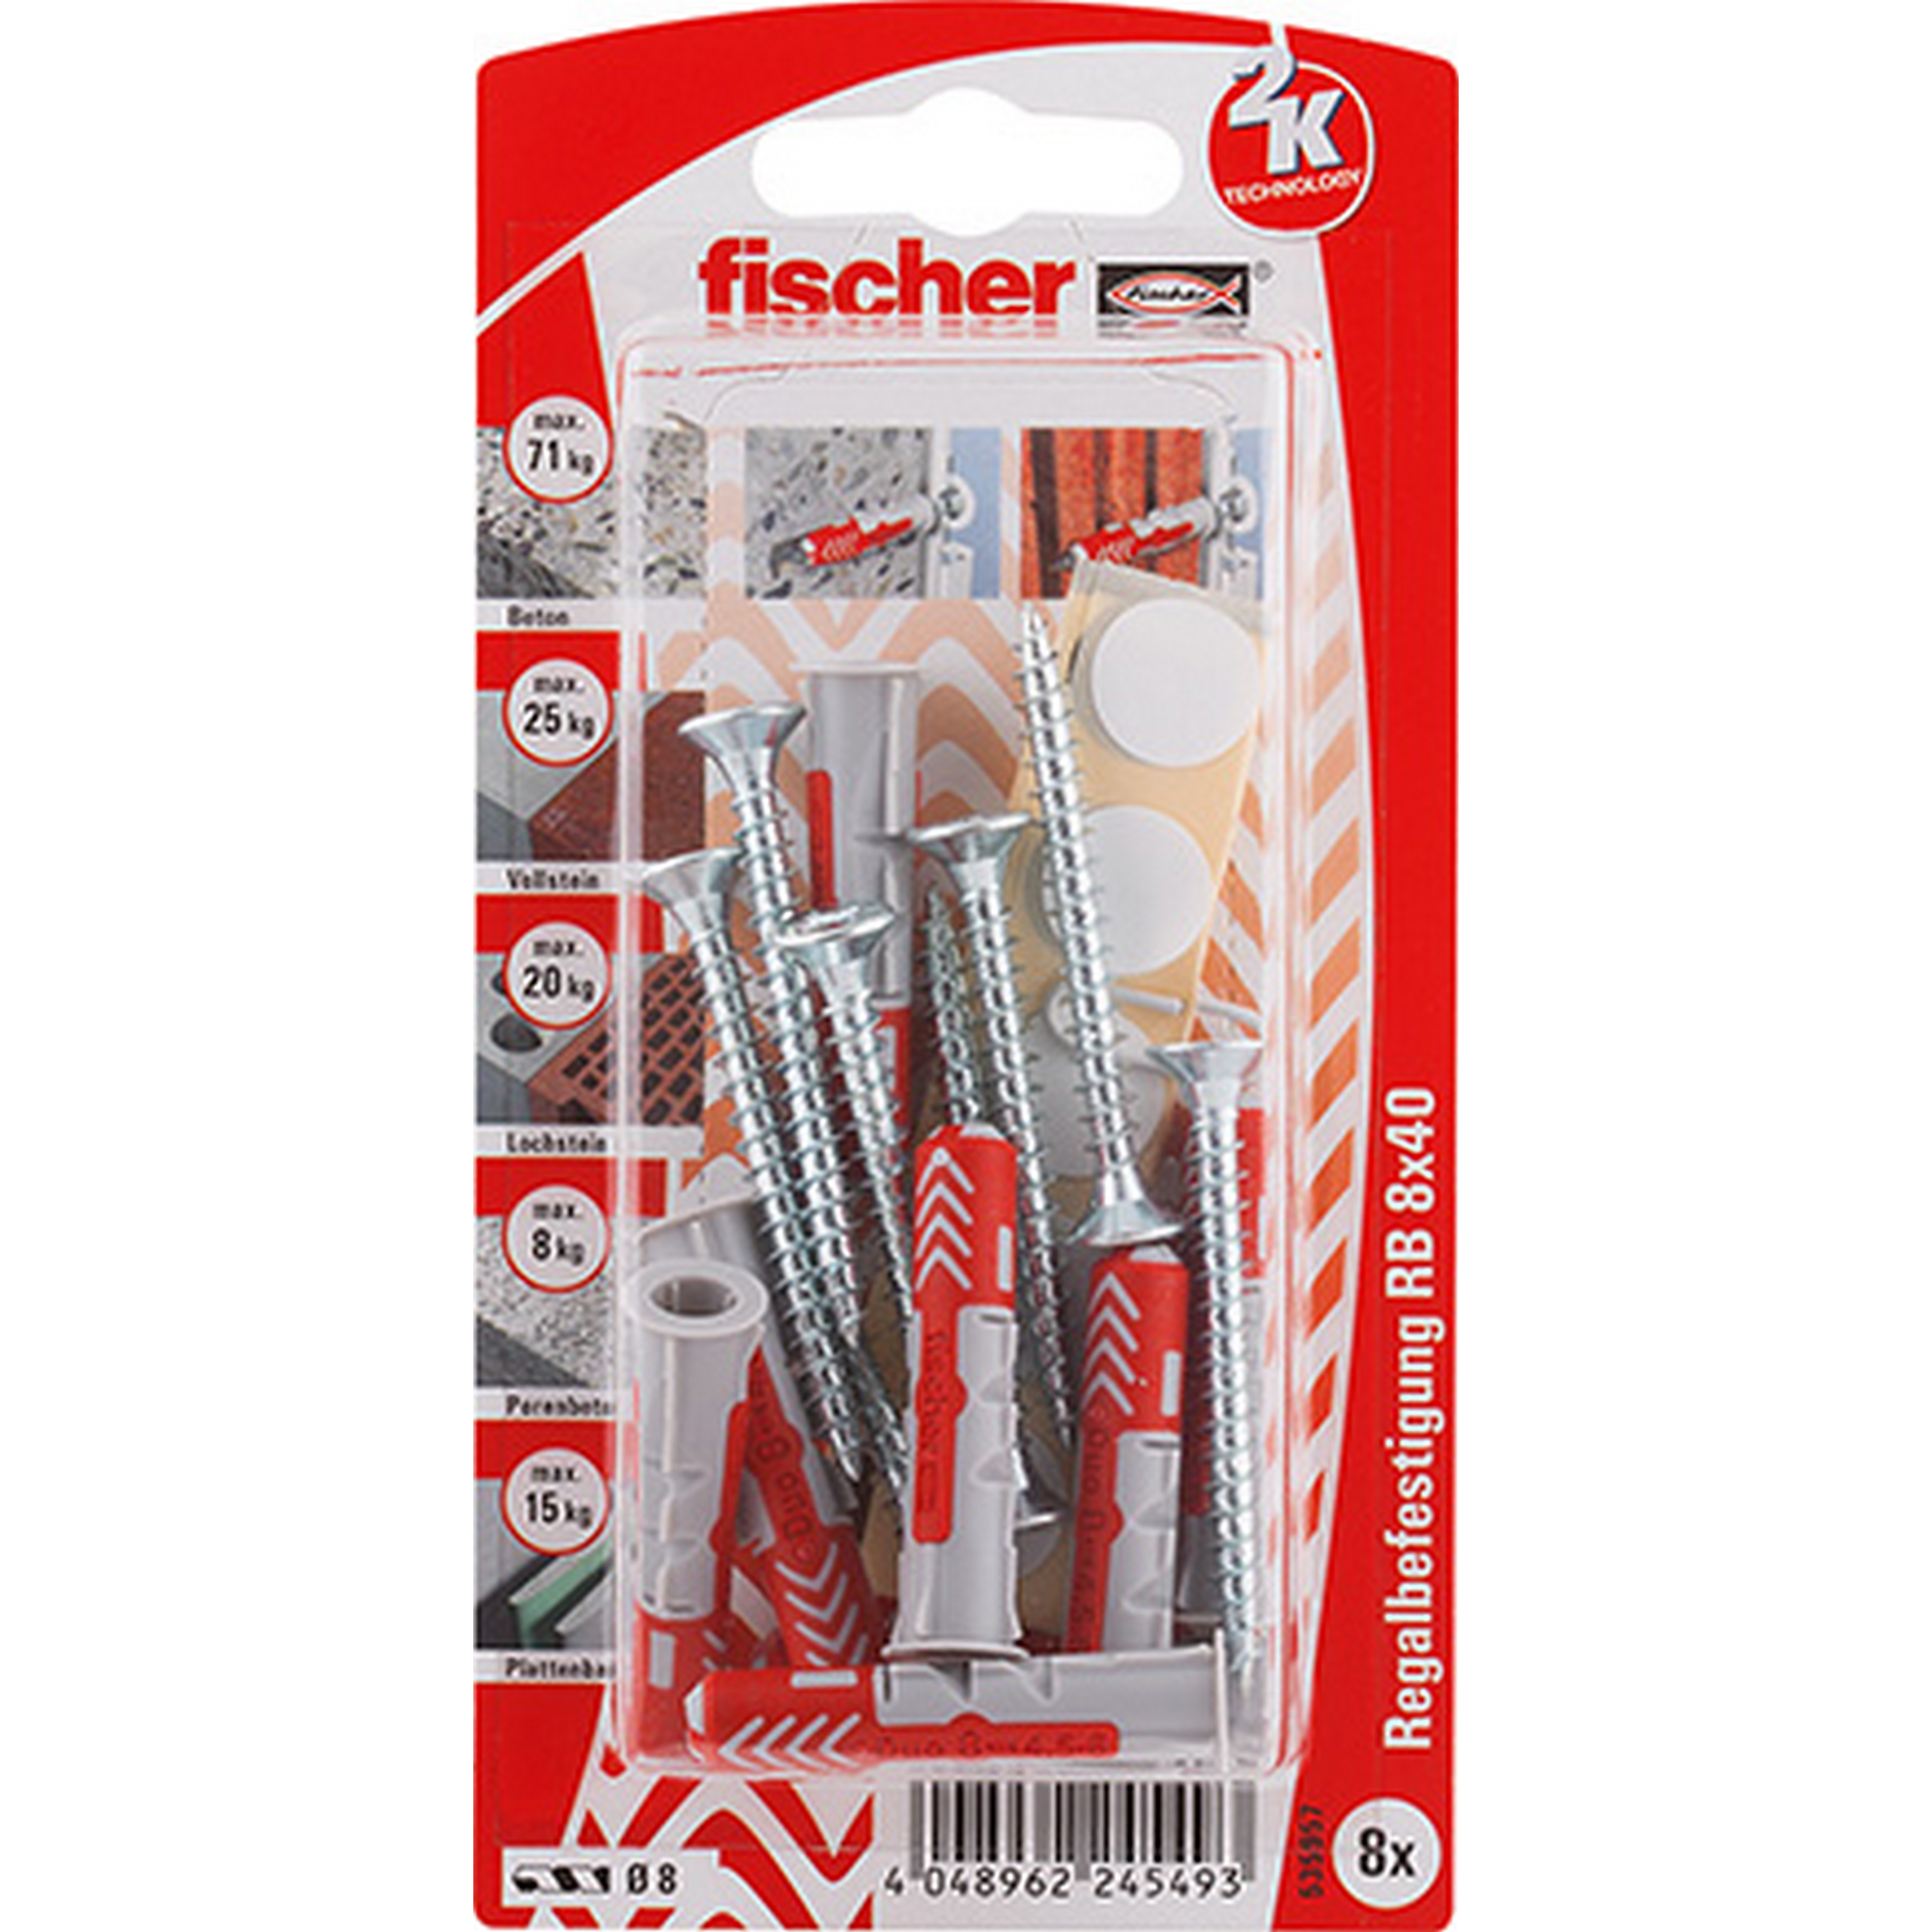 fischer DUOPOWER 8 x 40 RB 8 Stück + product picture